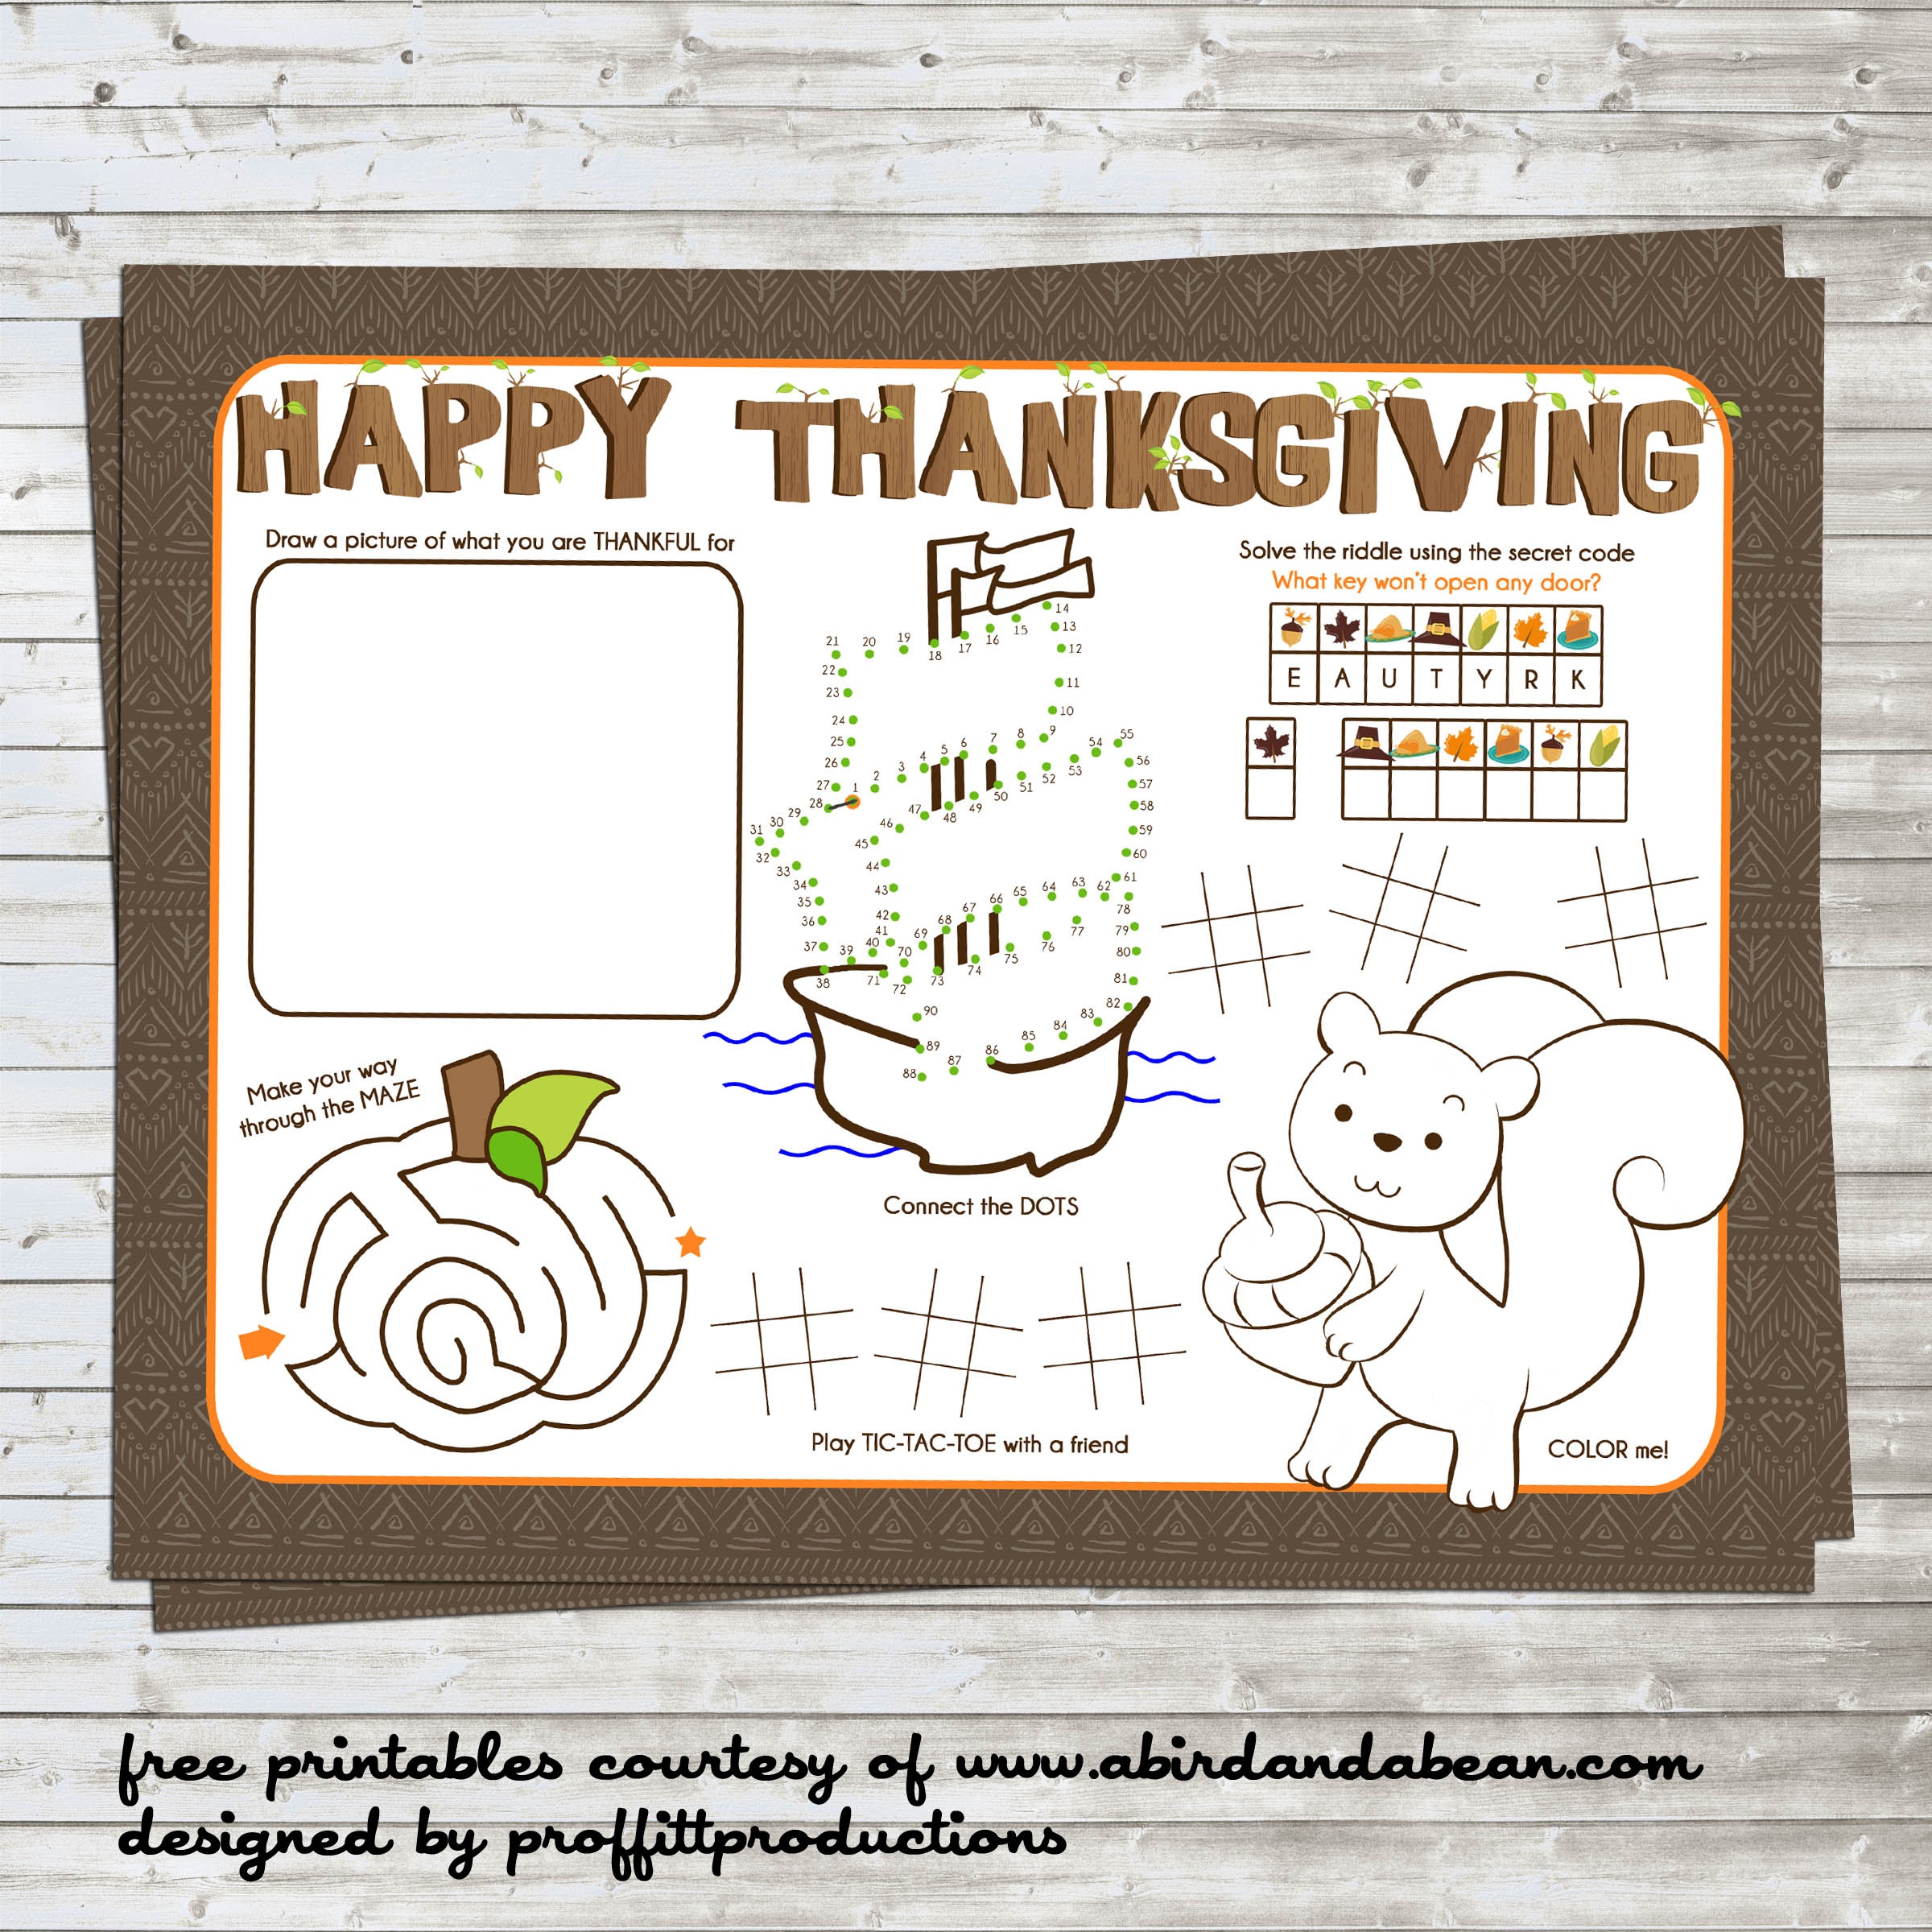 Free Printable :: Thanksgiving Placemat For The Kids - Free Printable Thanksgiving Images